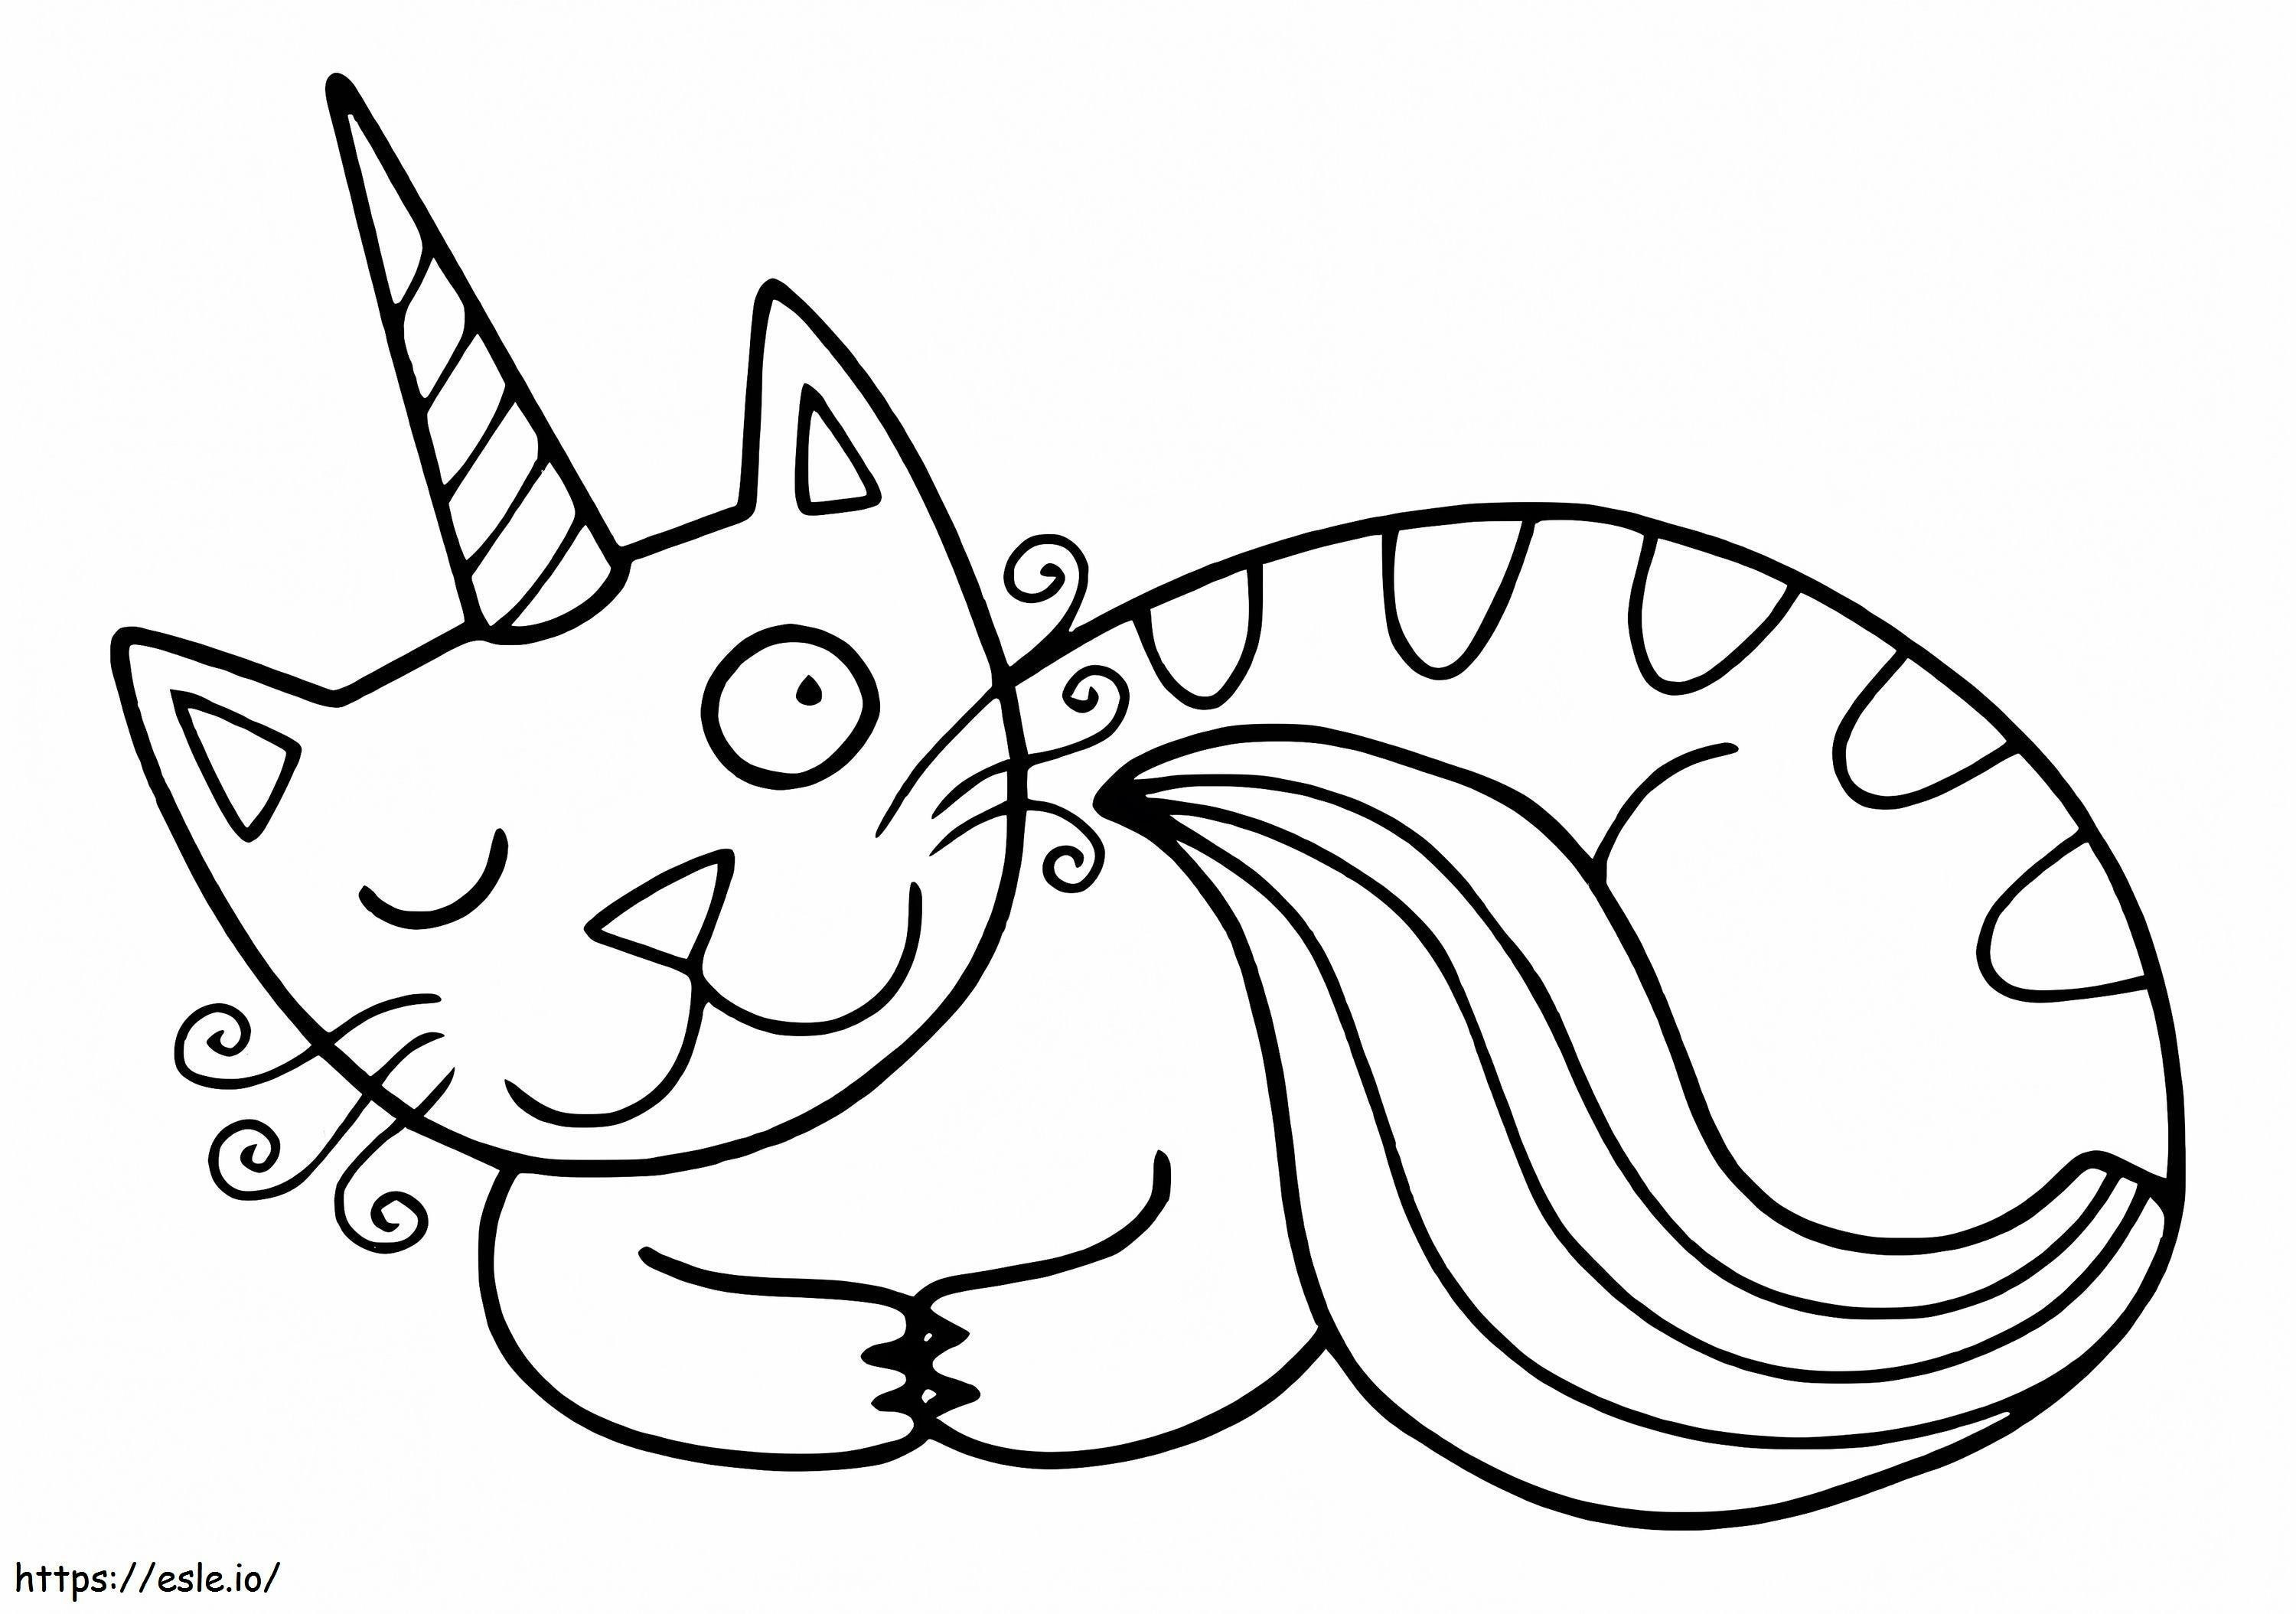 Funny Unicorn Cat coloring page